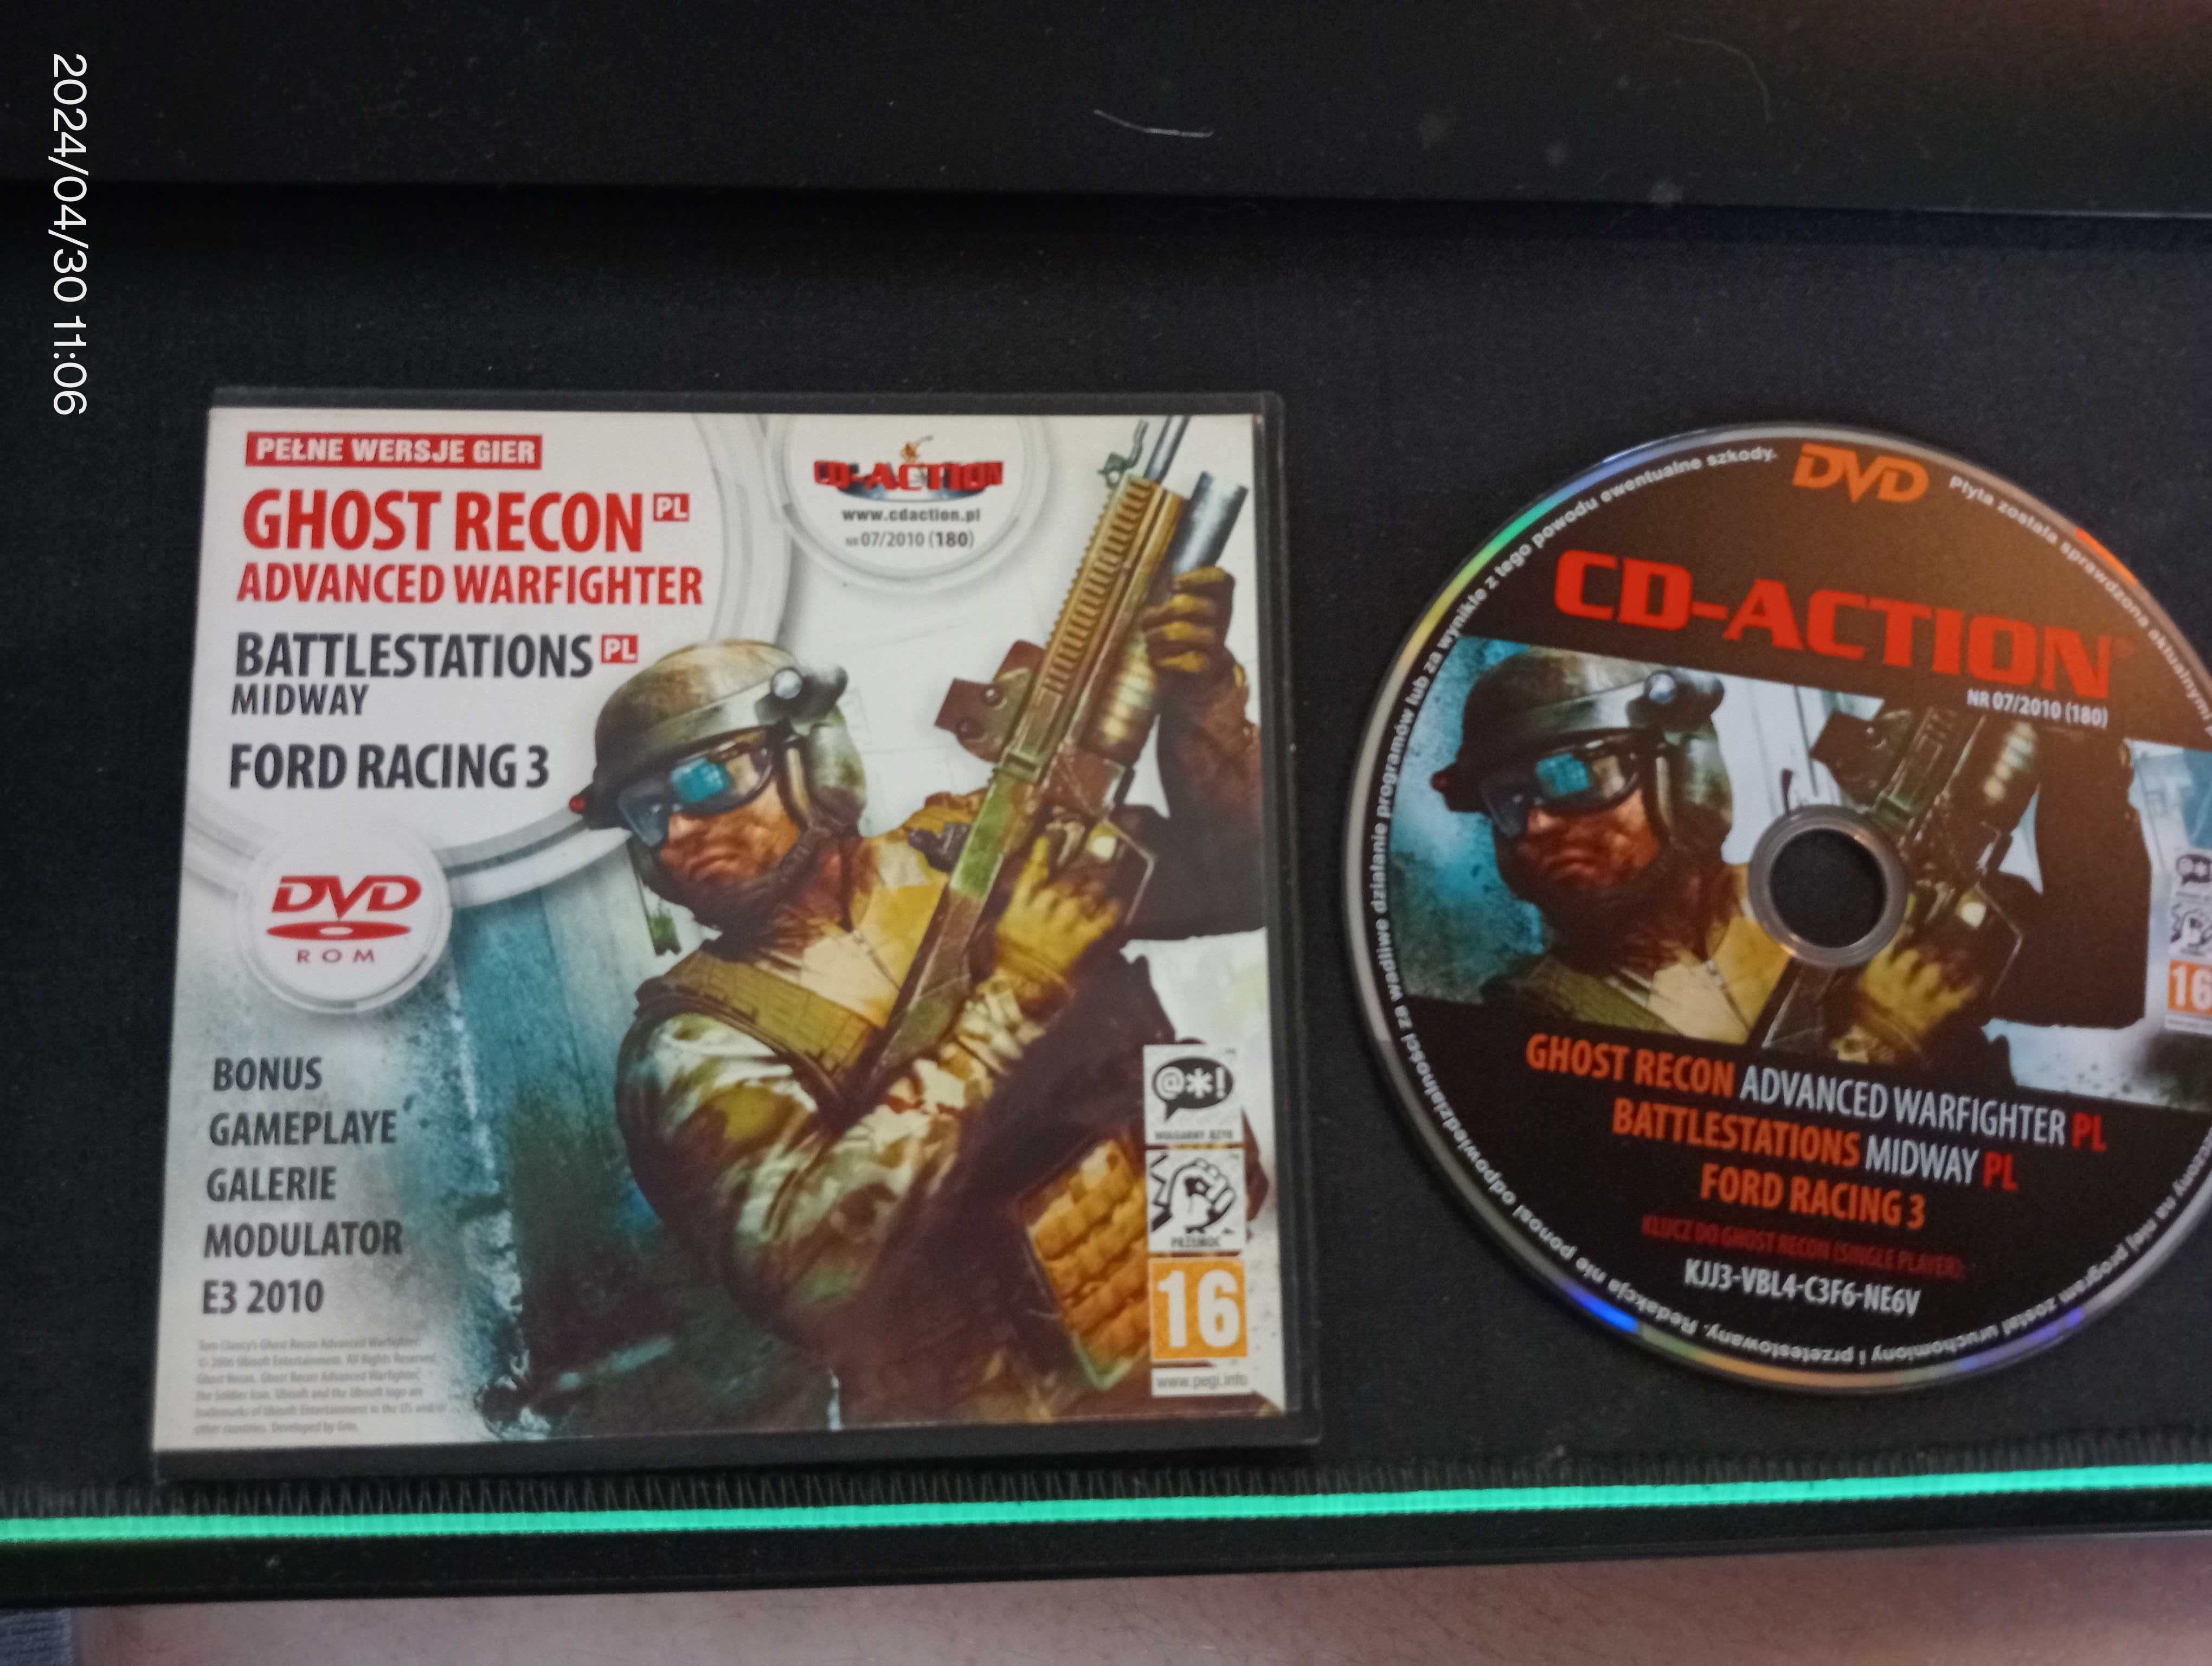 Ghost Recon Advanced Warfighter+Battelstations Midway+Ford Racing 3 PC